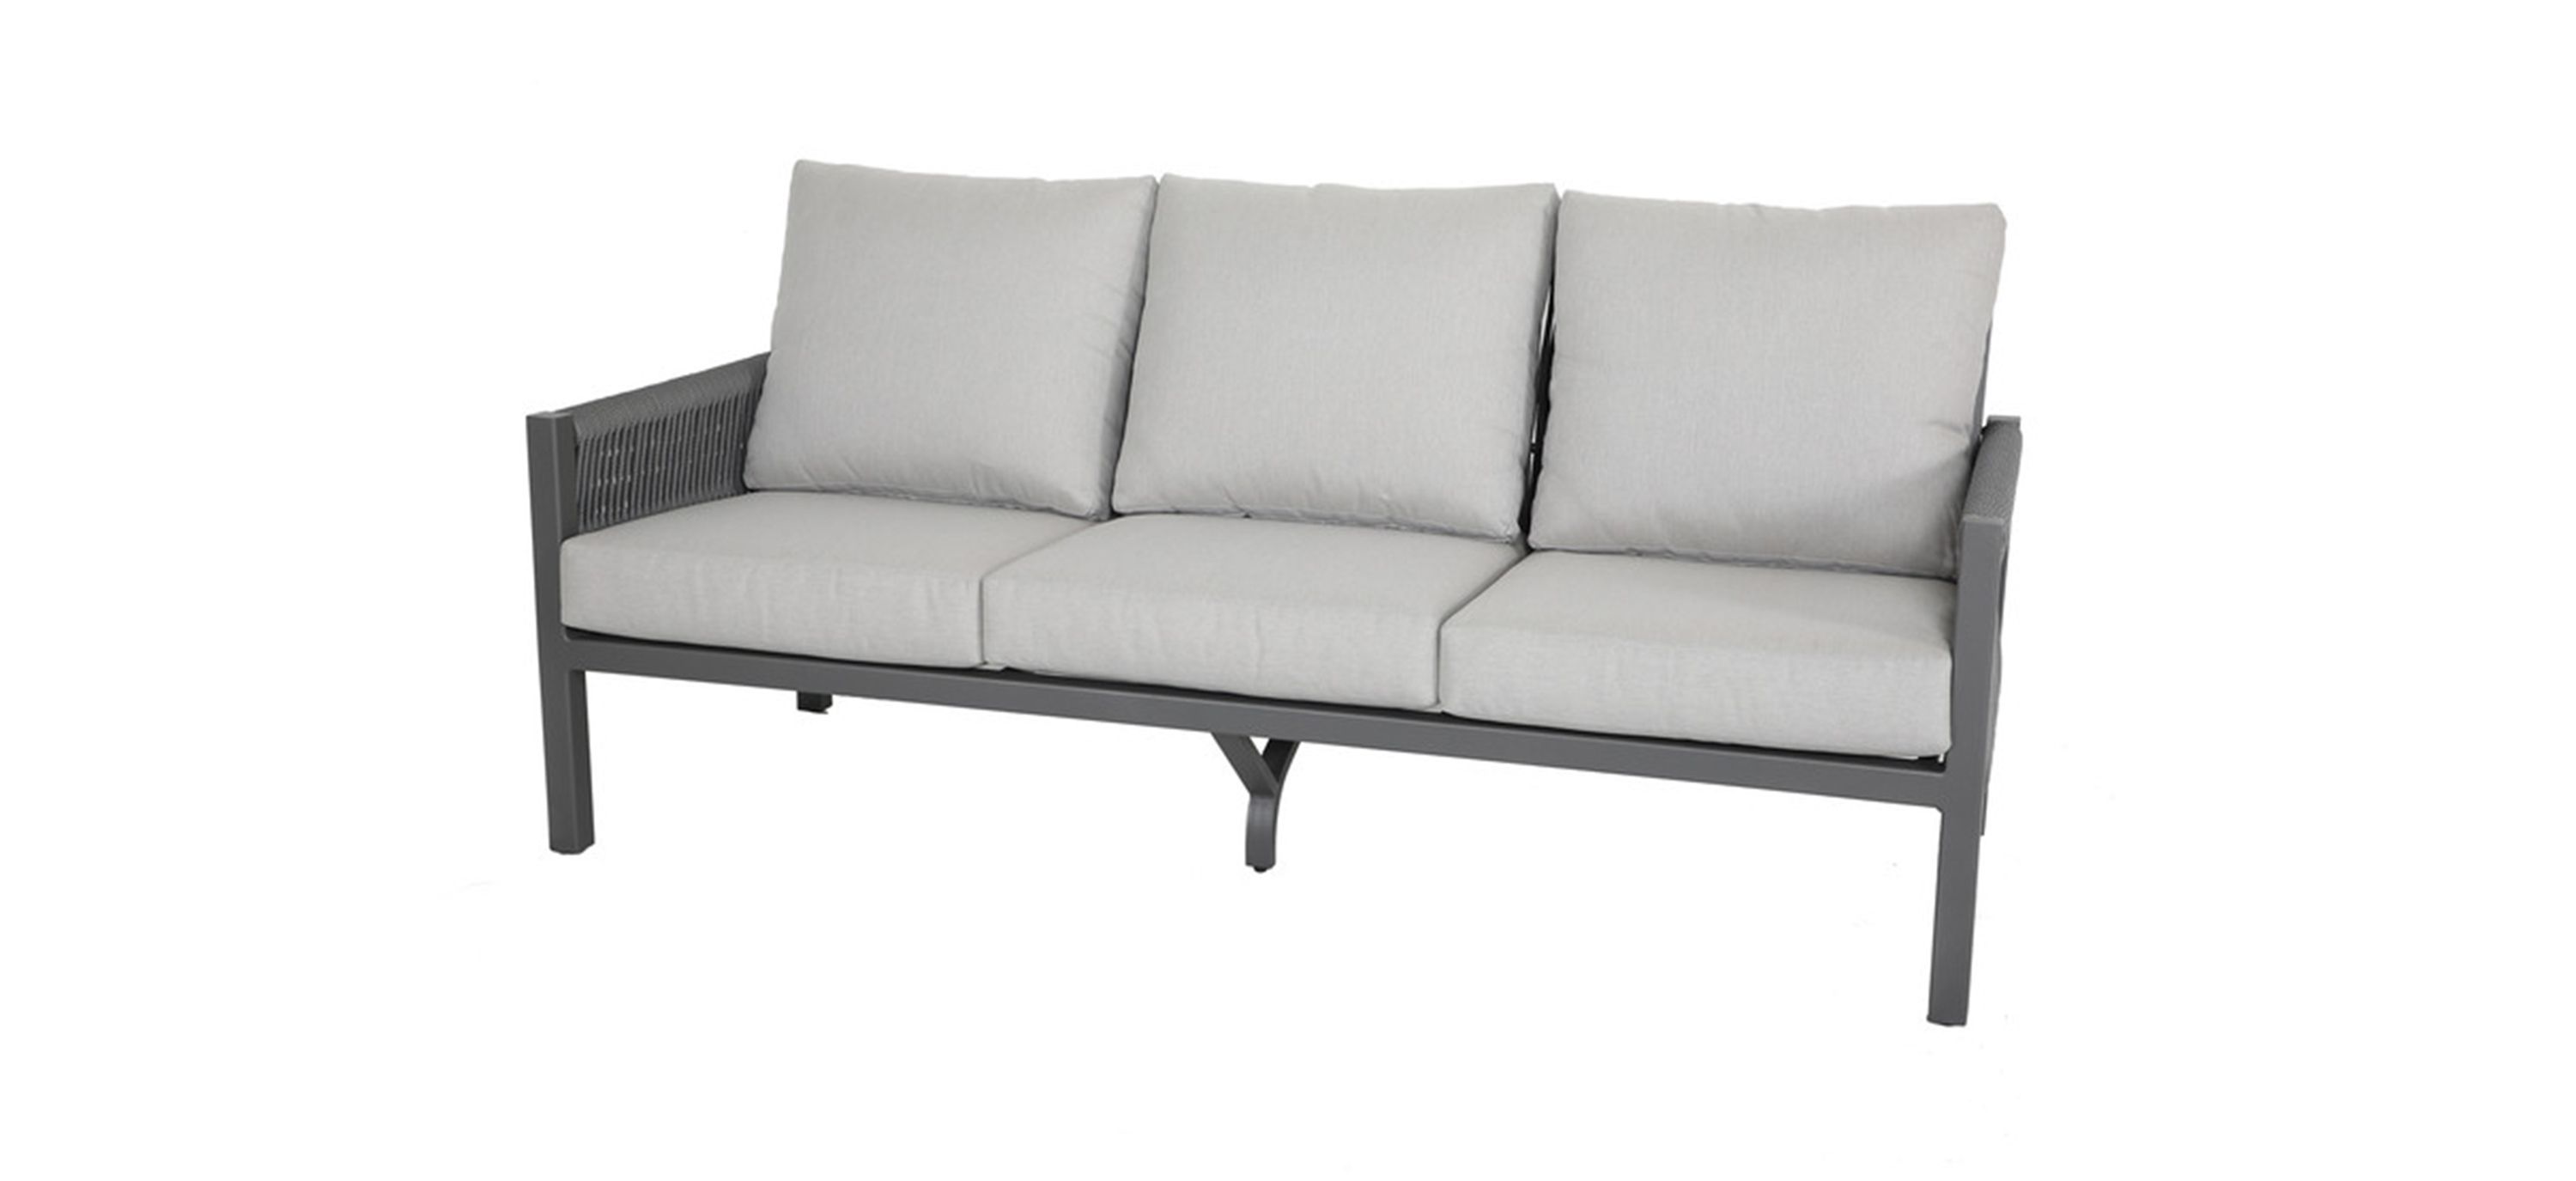 Palm Cay Outdoor Sofa with cushion